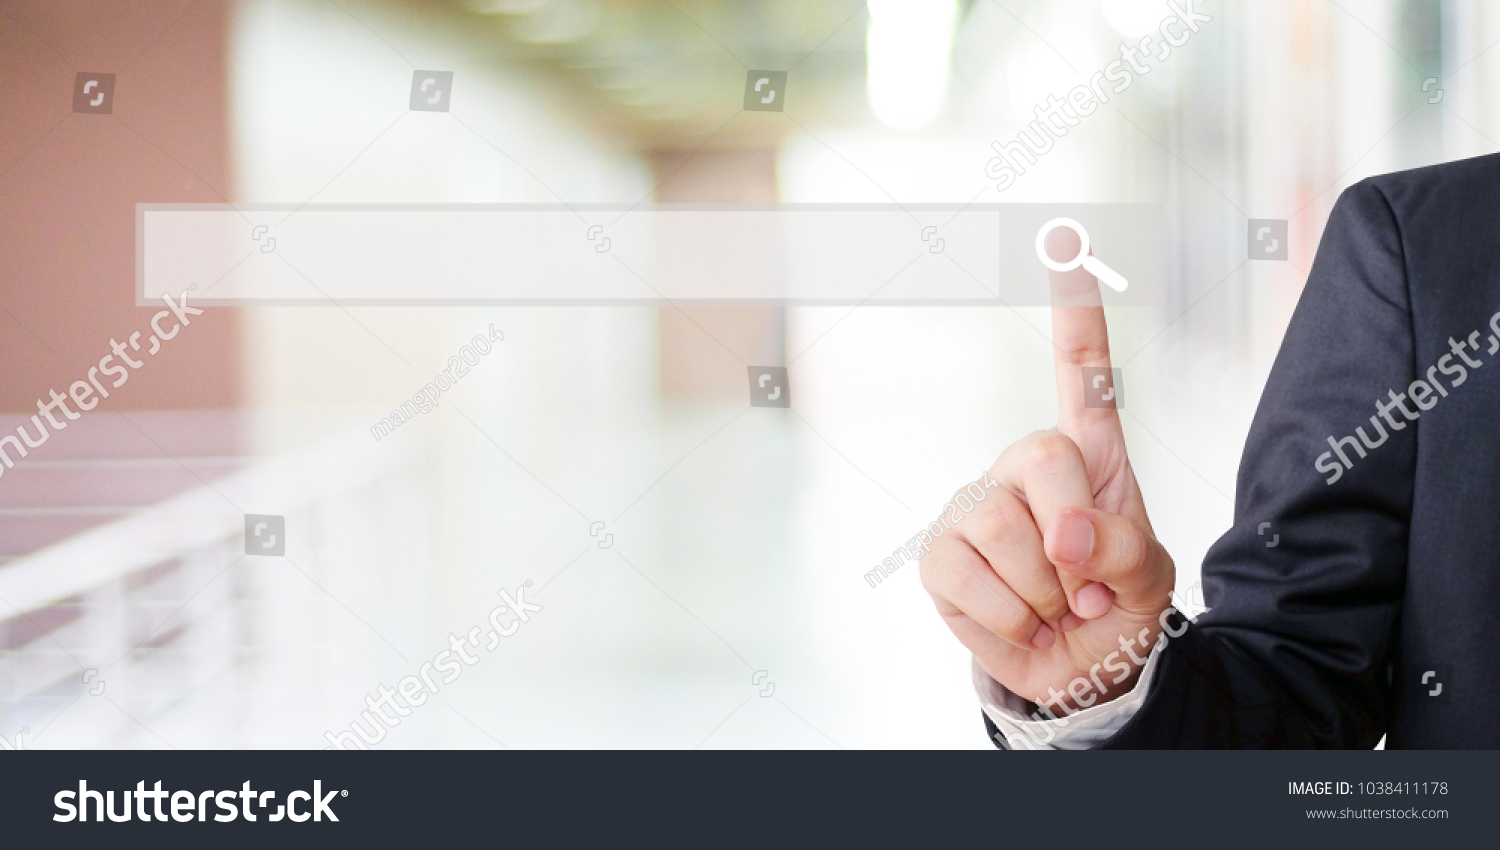 Businessman hand touching blank search bar over blur background, business and technology concept, search engine optimization, web banner #1038411178